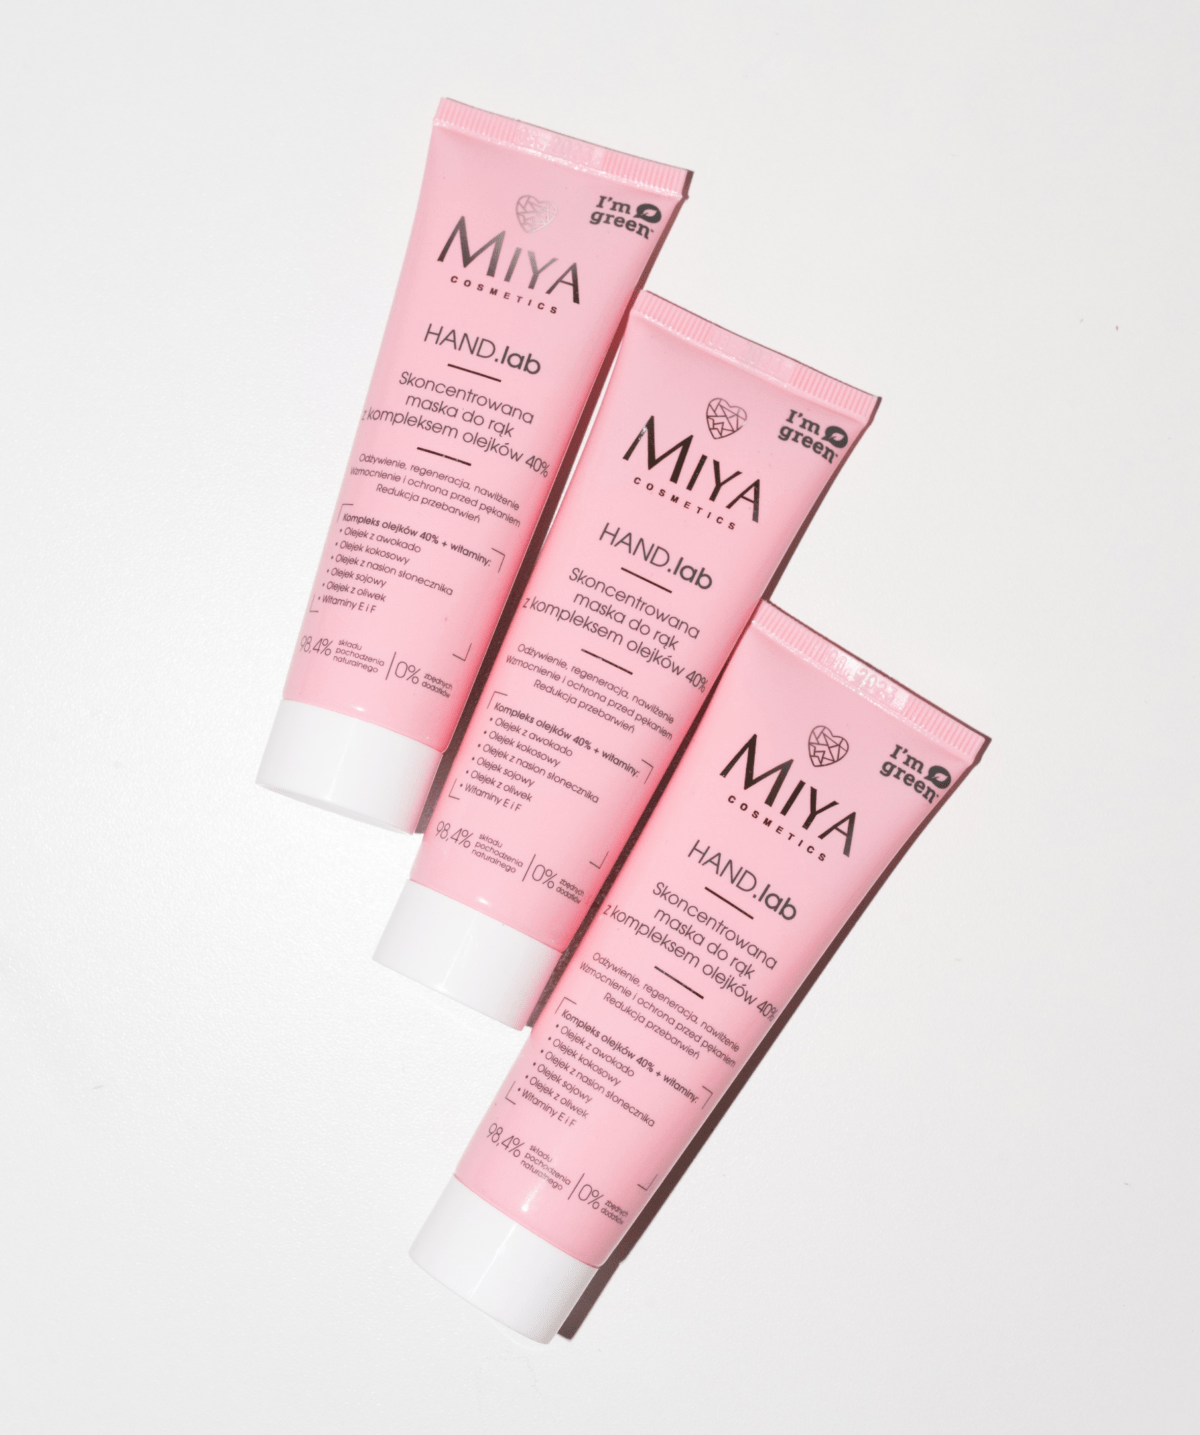 Концентрована маска для рук та нігтів Miya Cosmetics Hand Lab Concentrated Mask For Hands & Nails With A Complex Of Oils 40% 50 мл - фото 5